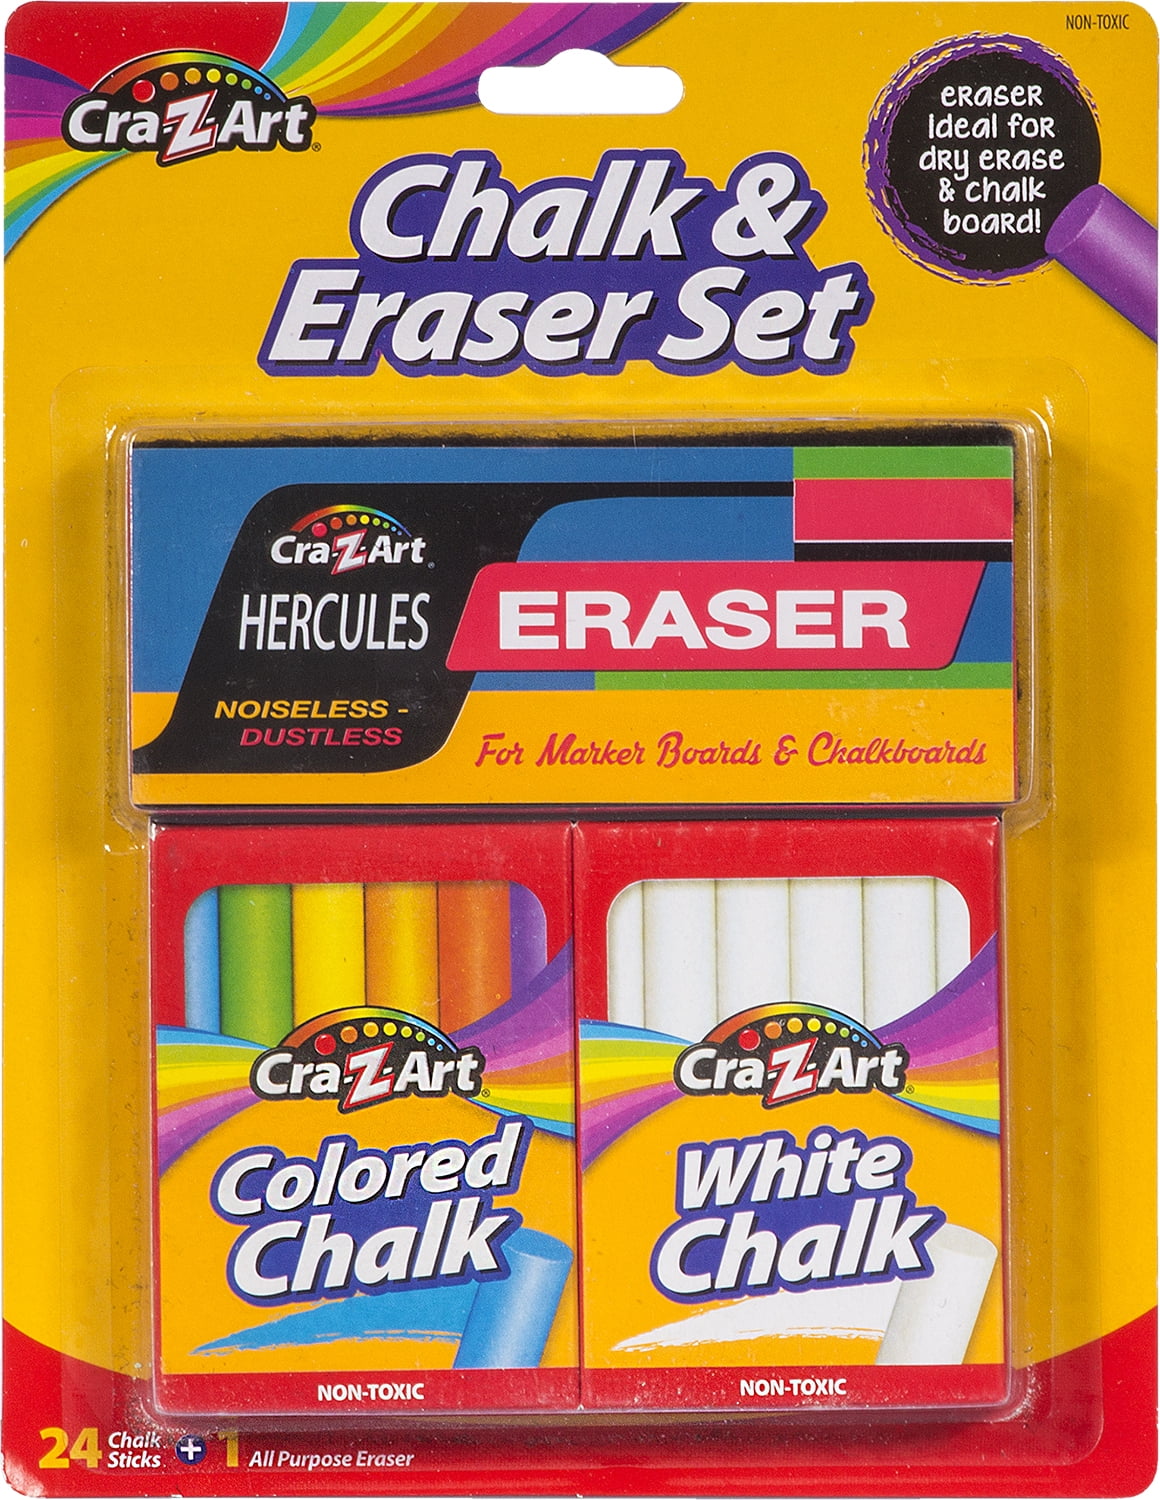 BAZIC 12 Color & 12 White Chalk w/ Eraser Set for School Crafts or Outside Play.